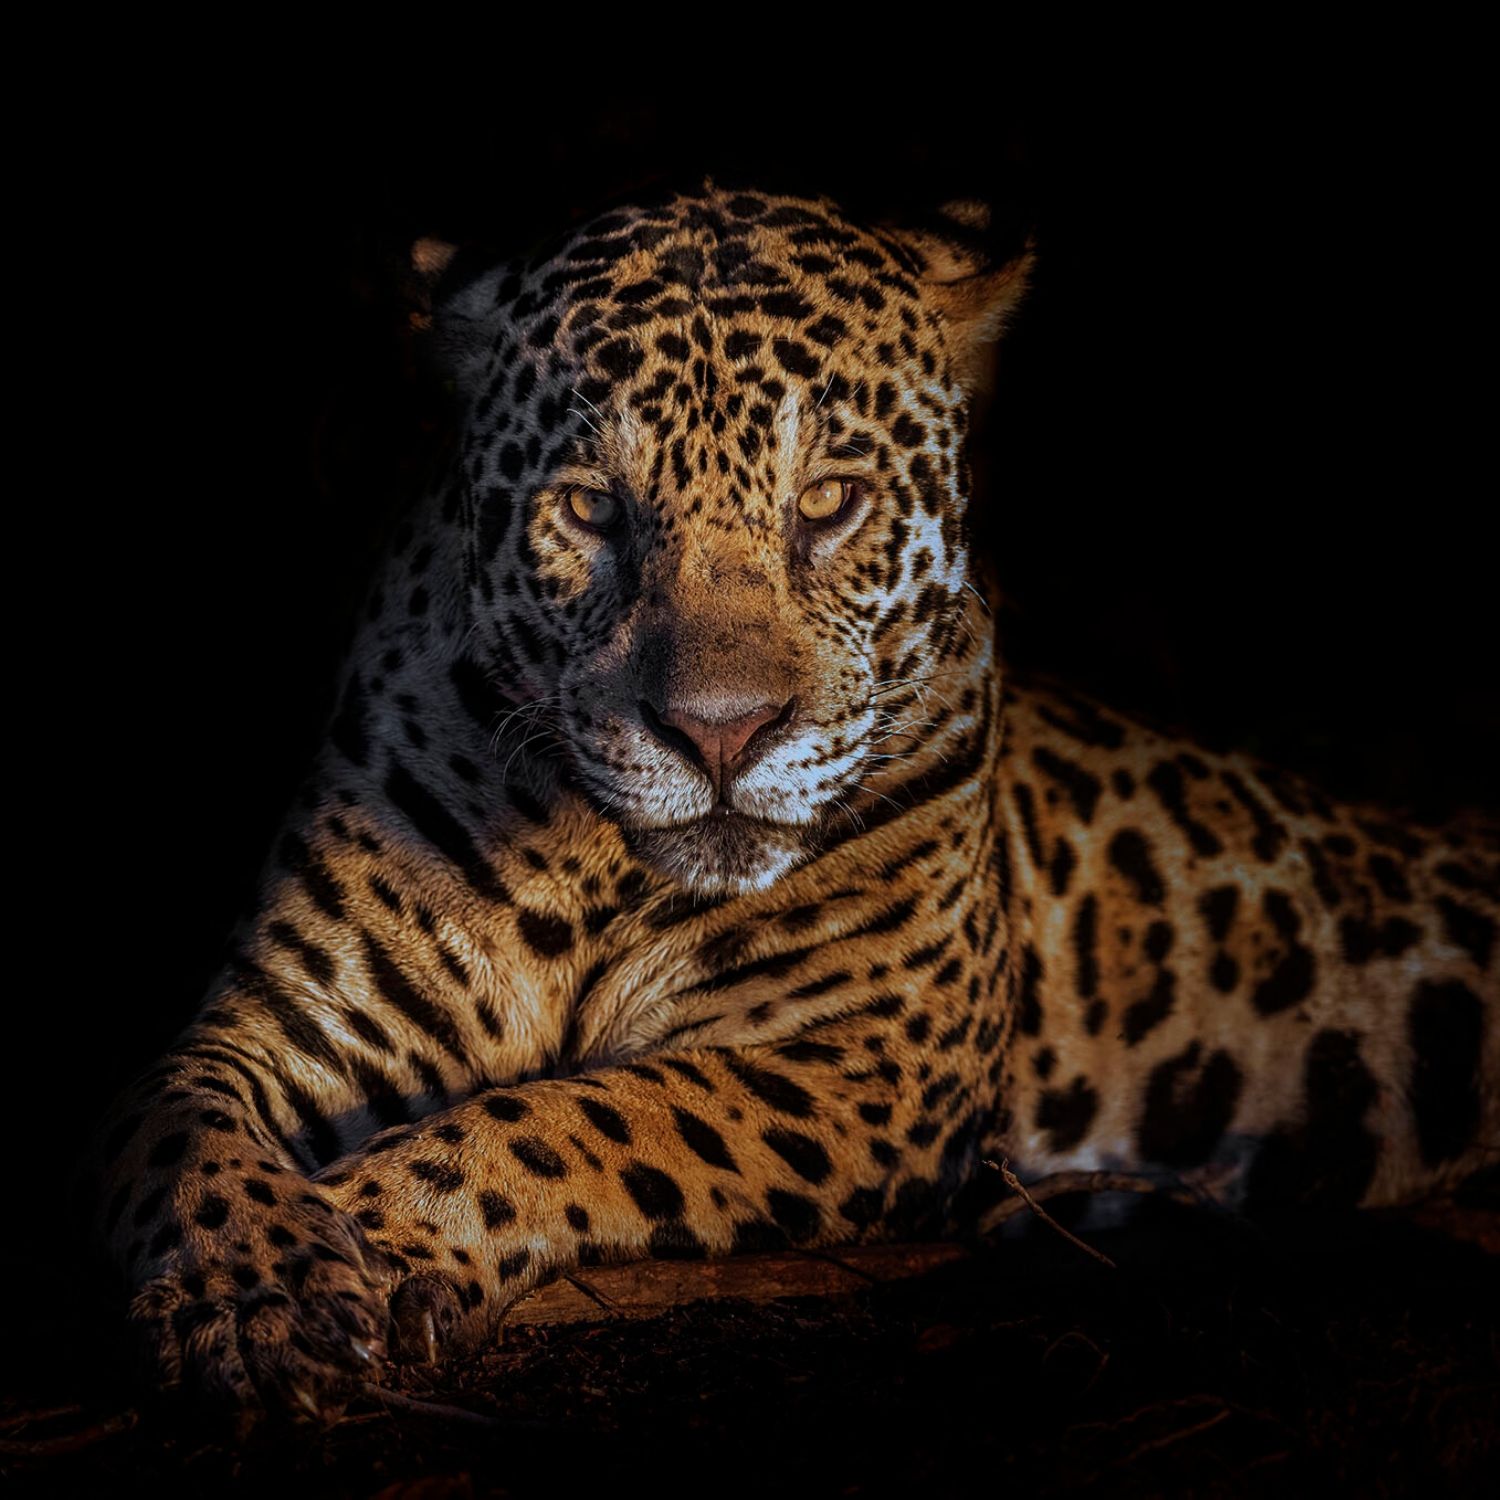 Wild jaguar of Brazil this wildlife photograph was capture by Ignacio Palacios while hosting a photography tour in Brazil